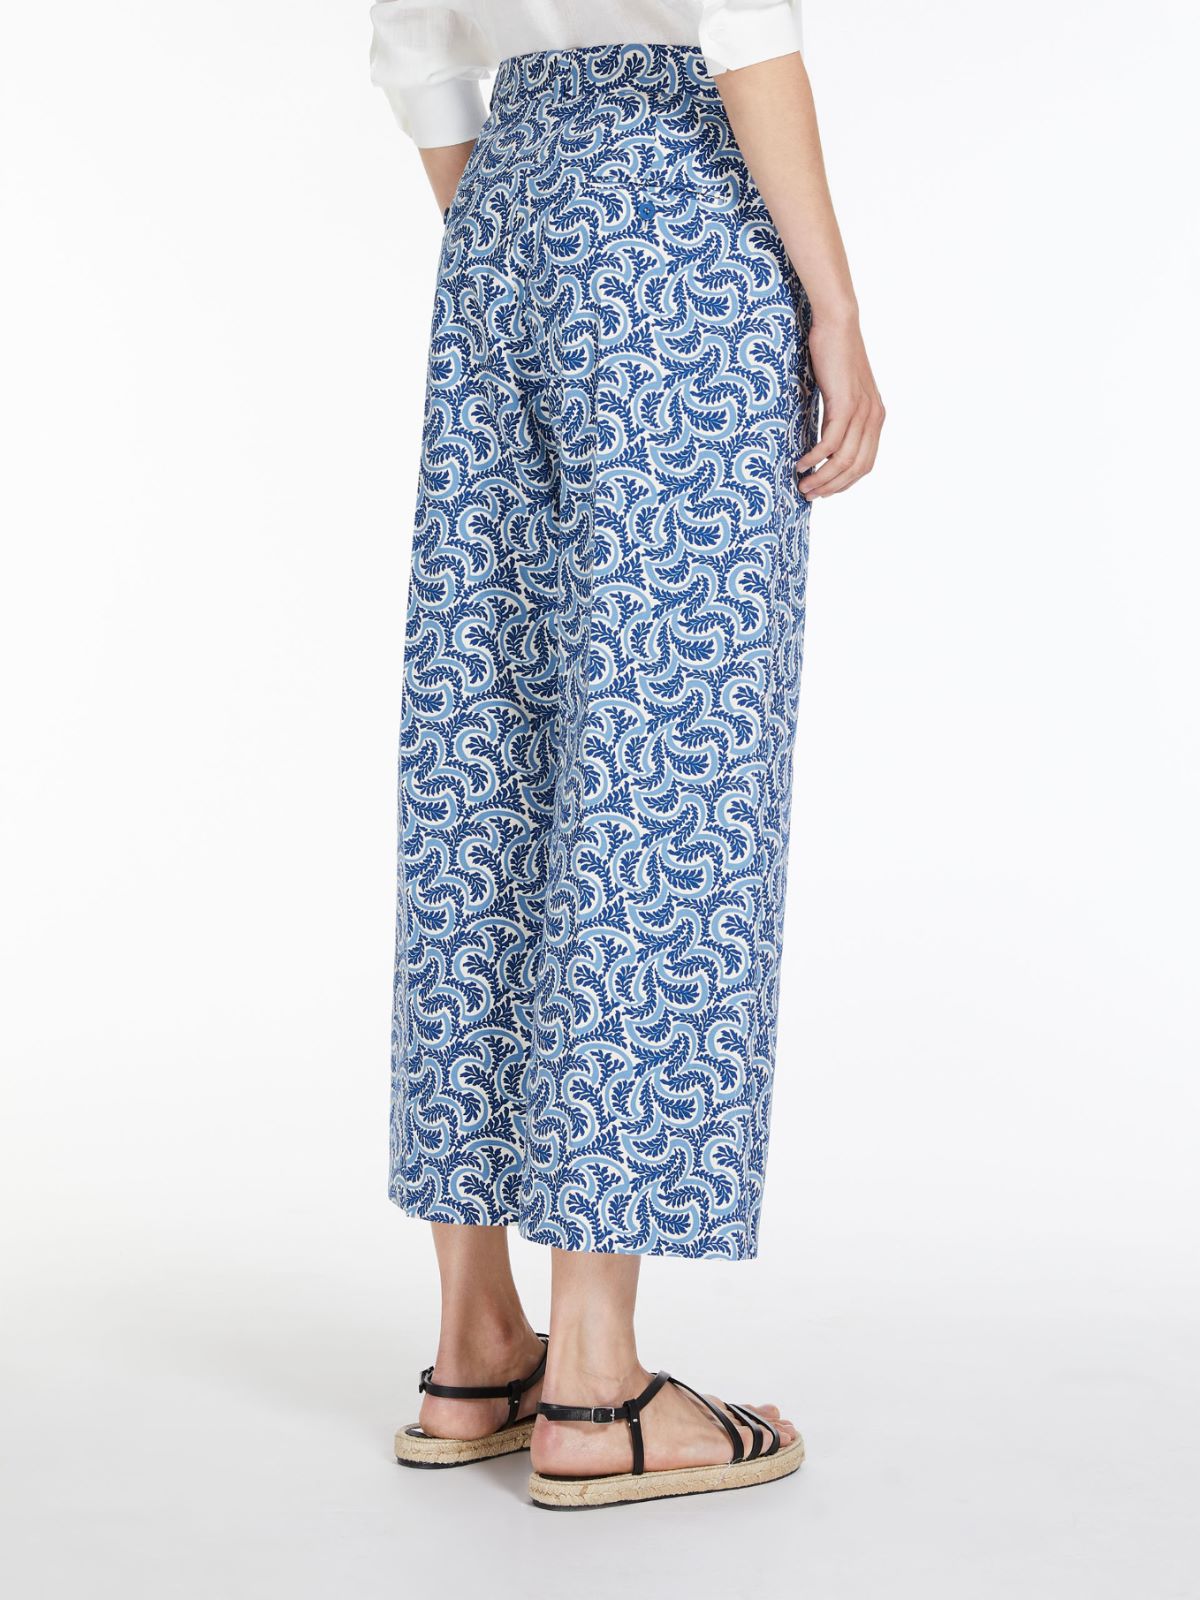 Trousers in printed cotton - LIGHT BLUE - Weekend Max Mara - 3